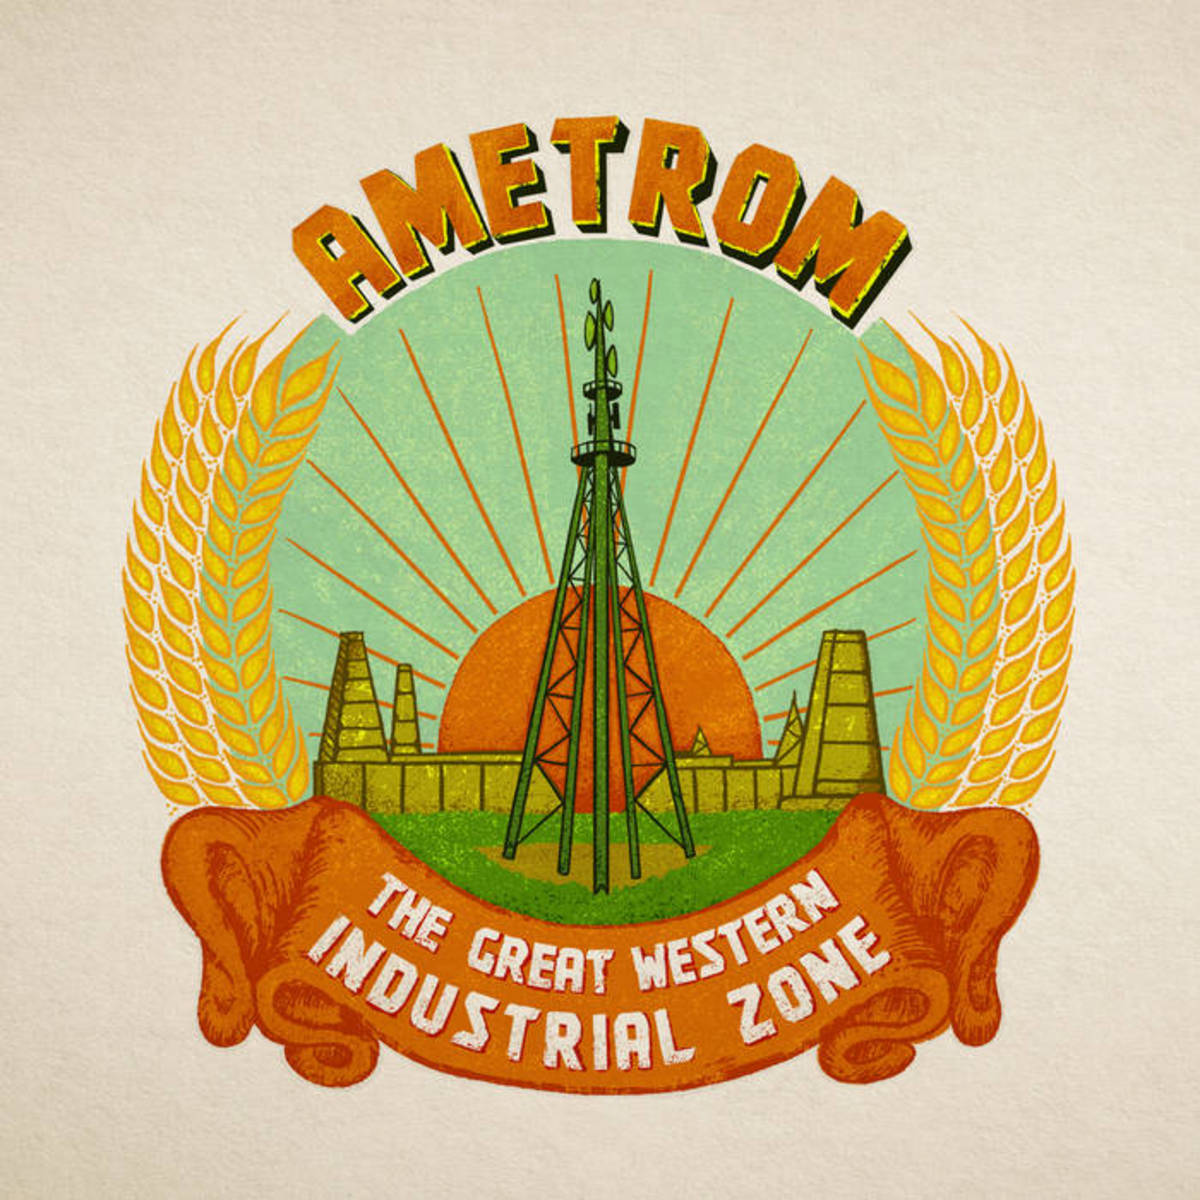 synth-album-review-the-great-western-industrial-zone-by-ametrom